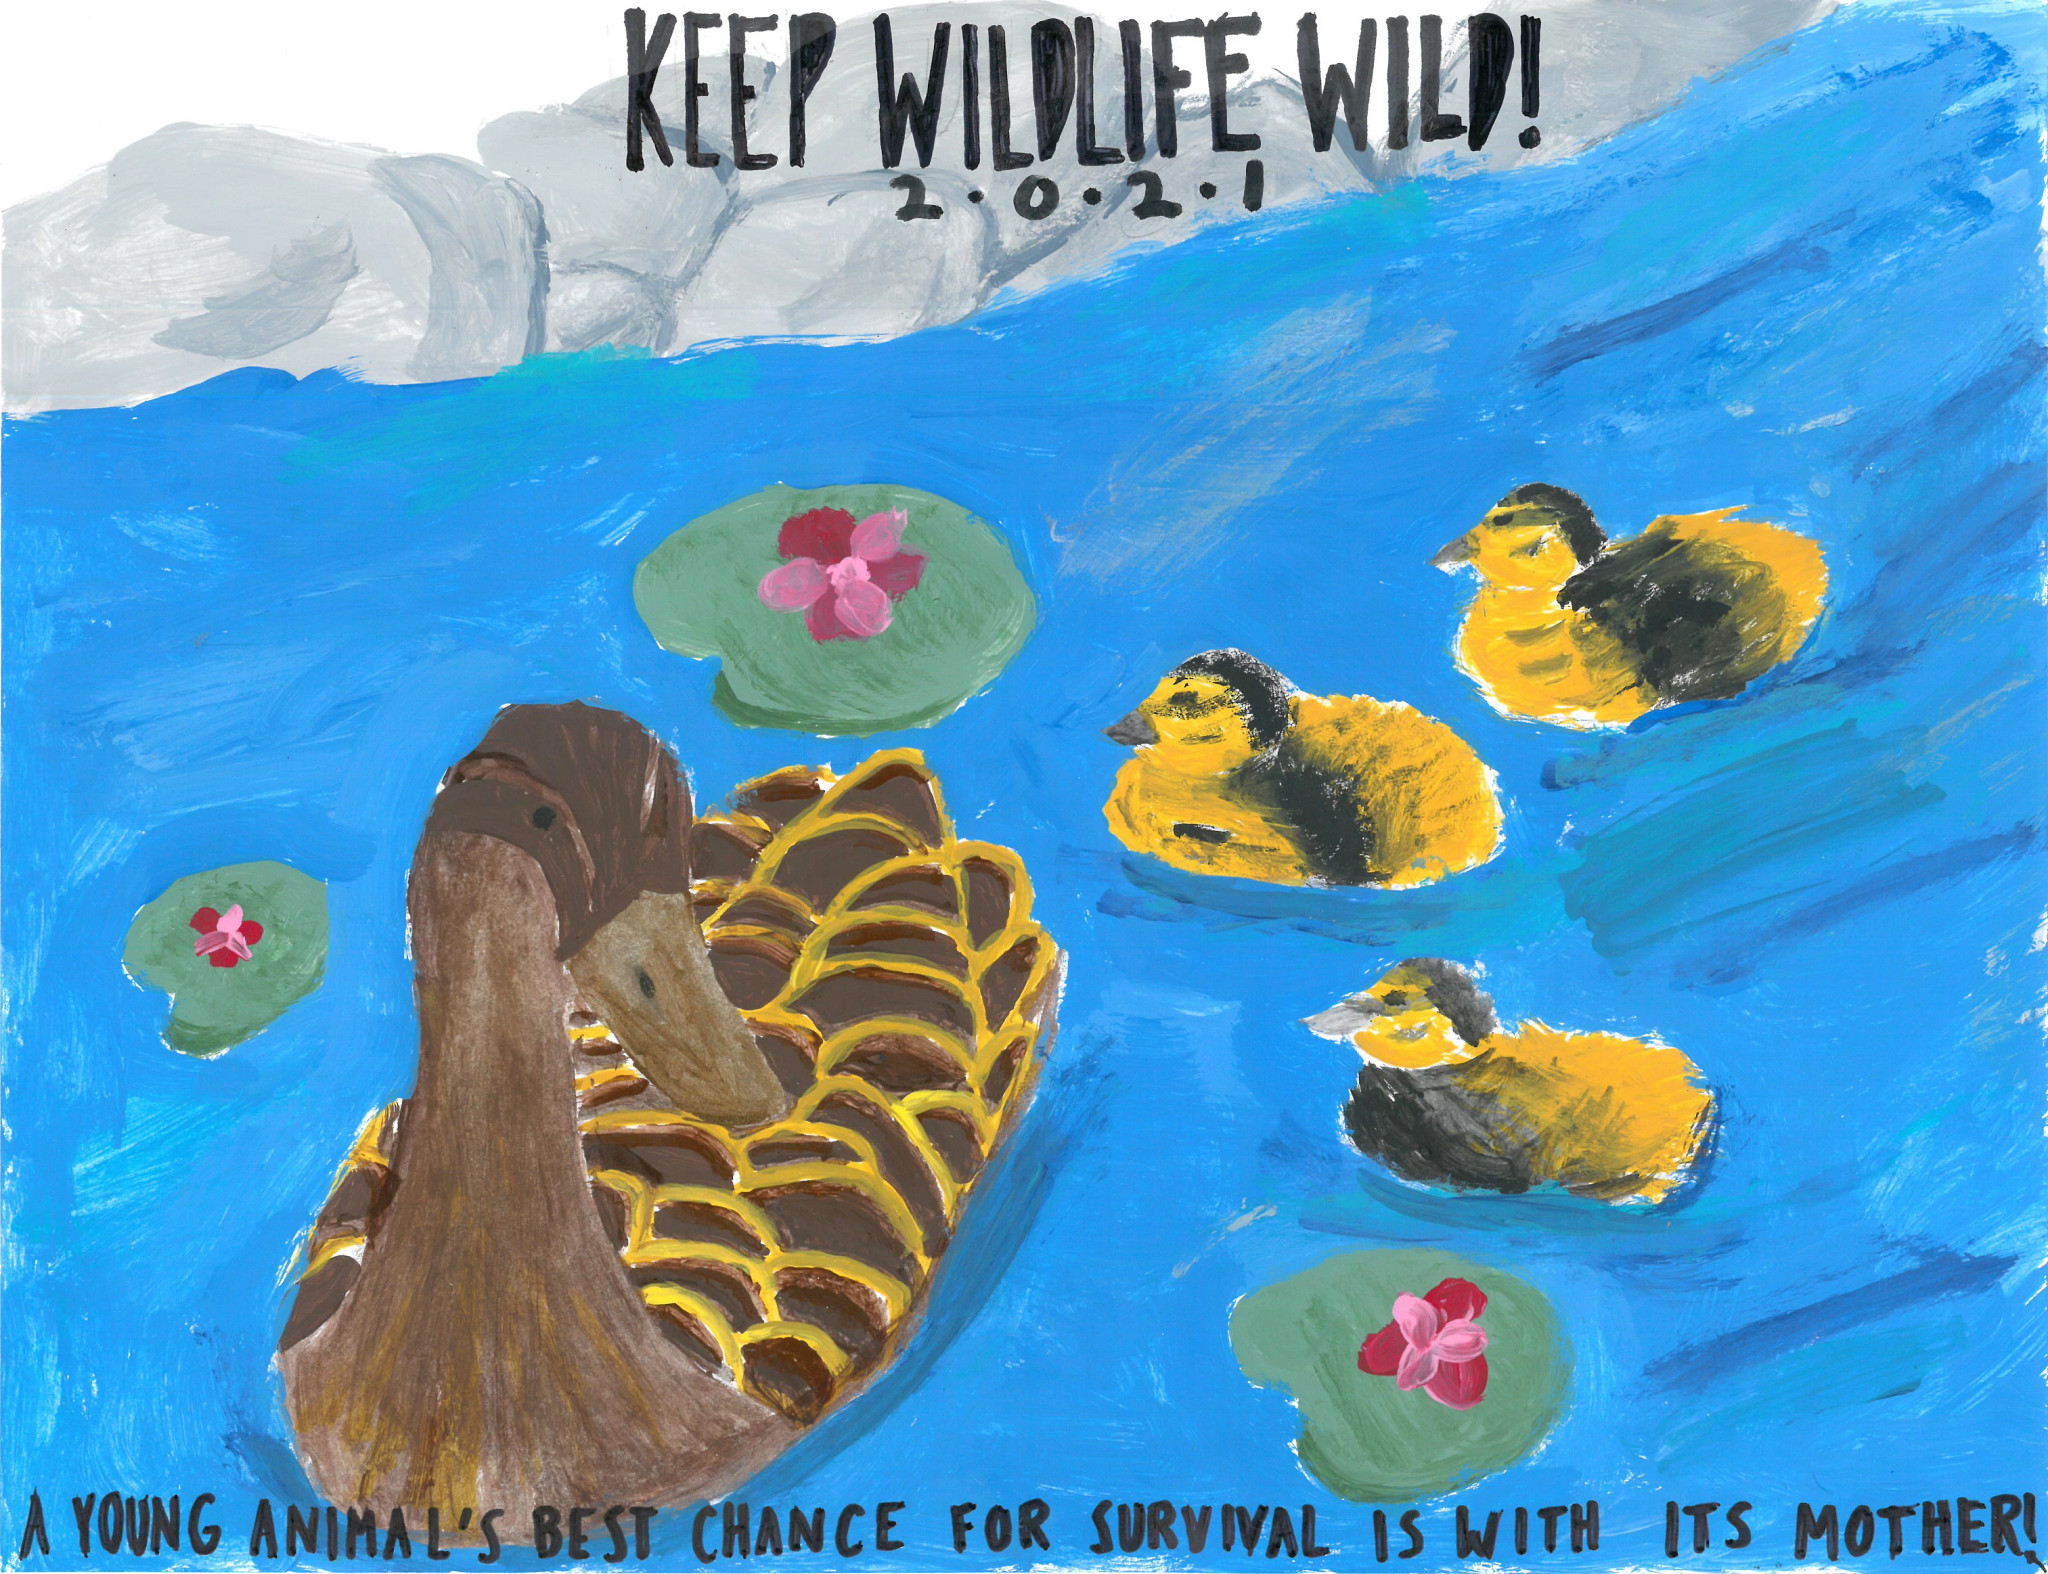 a drawing of a mother duckling and her chicks swimming with the text Keep Wildlife Wild